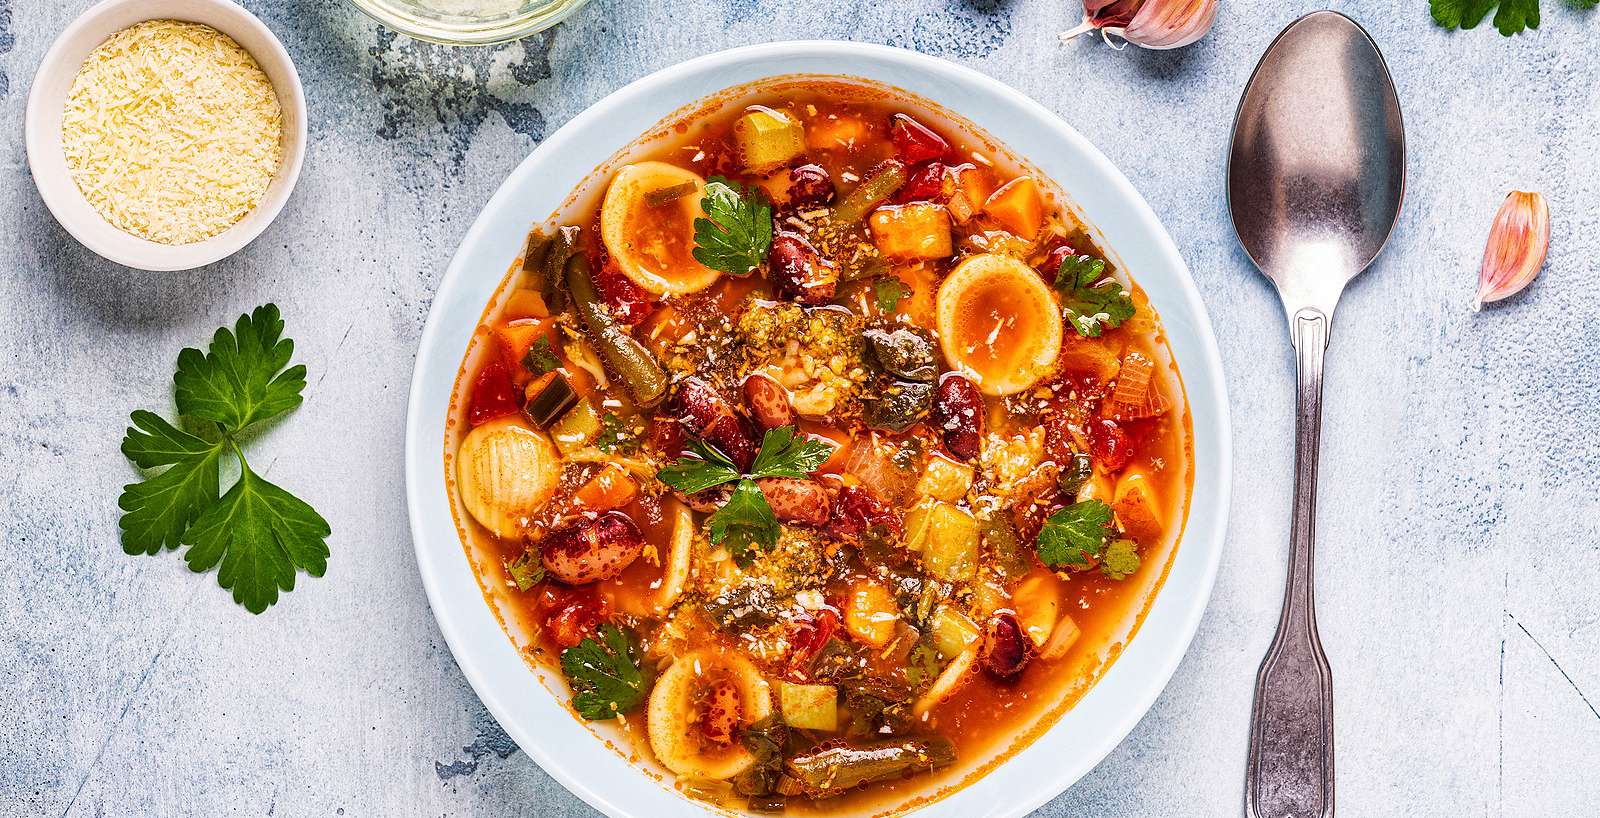 Homemade Slow-Cooker Minestrone Soup